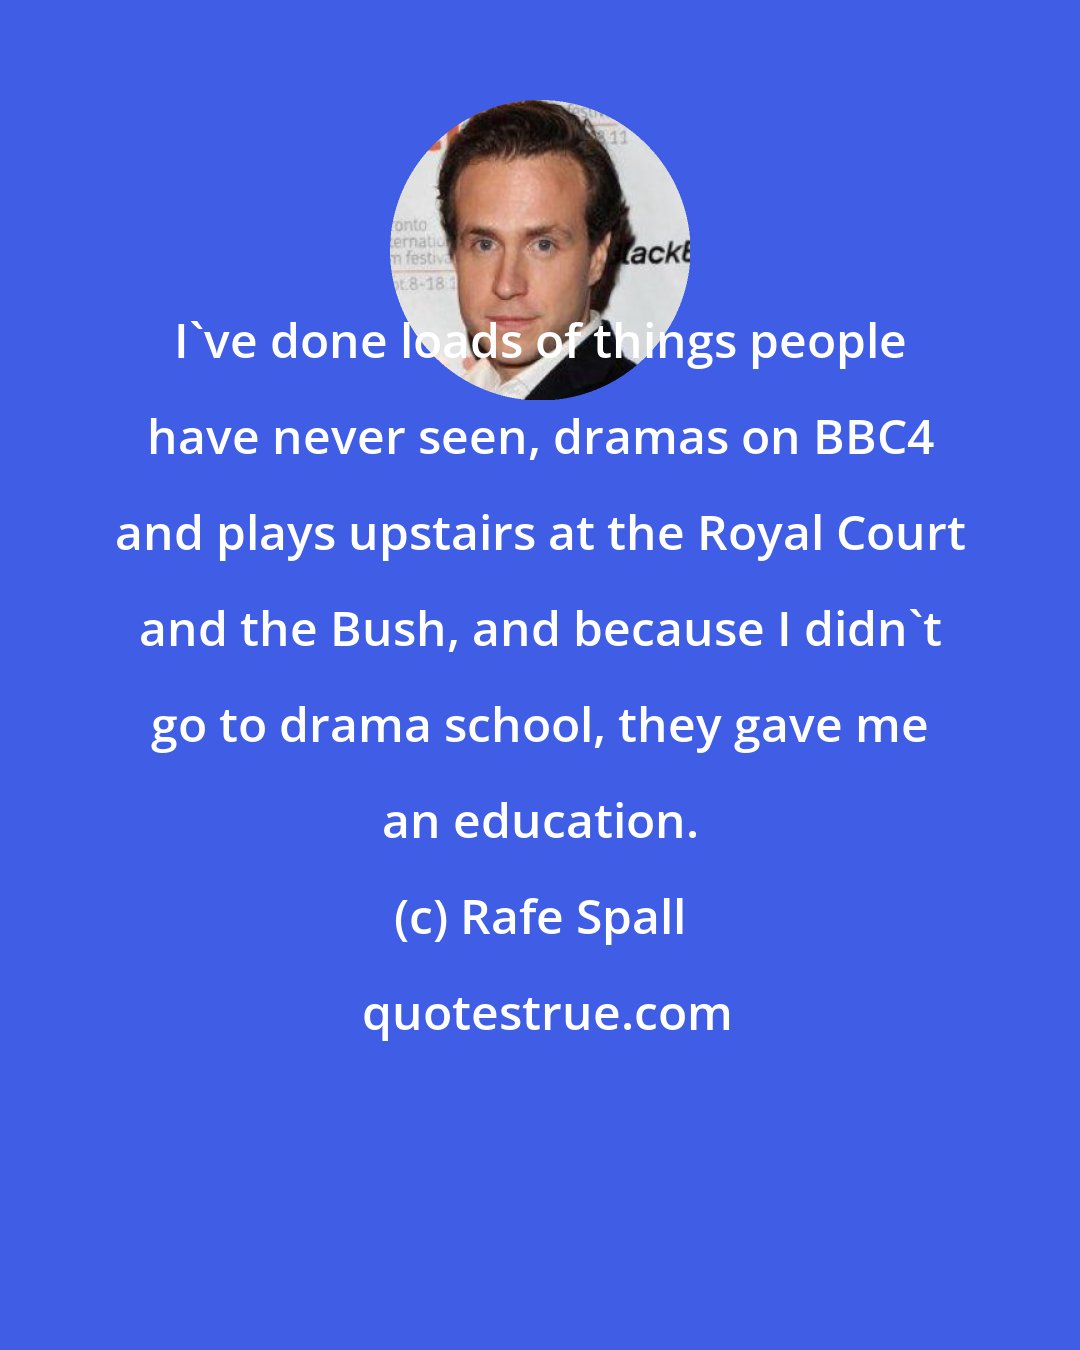 Rafe Spall: I've done loads of things people have never seen, dramas on BBC4 and plays upstairs at the Royal Court and the Bush, and because I didn't go to drama school, they gave me an education.